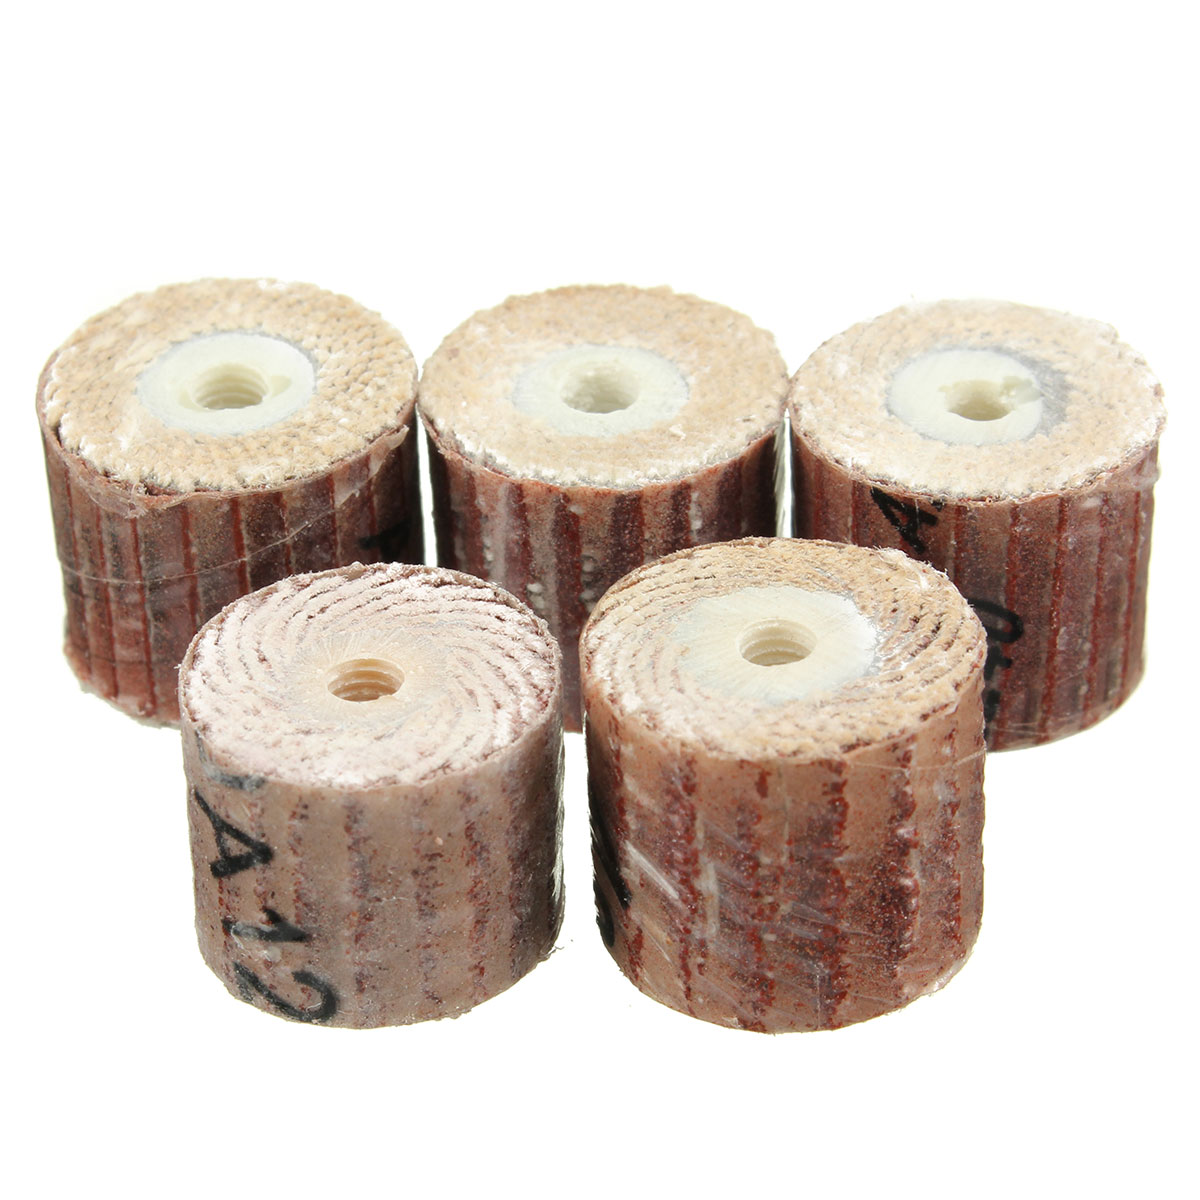 10pcs-12mm-Sandpaper-Grinding-Wheel-80-600-Grit-for-Rotary-Tools-982946